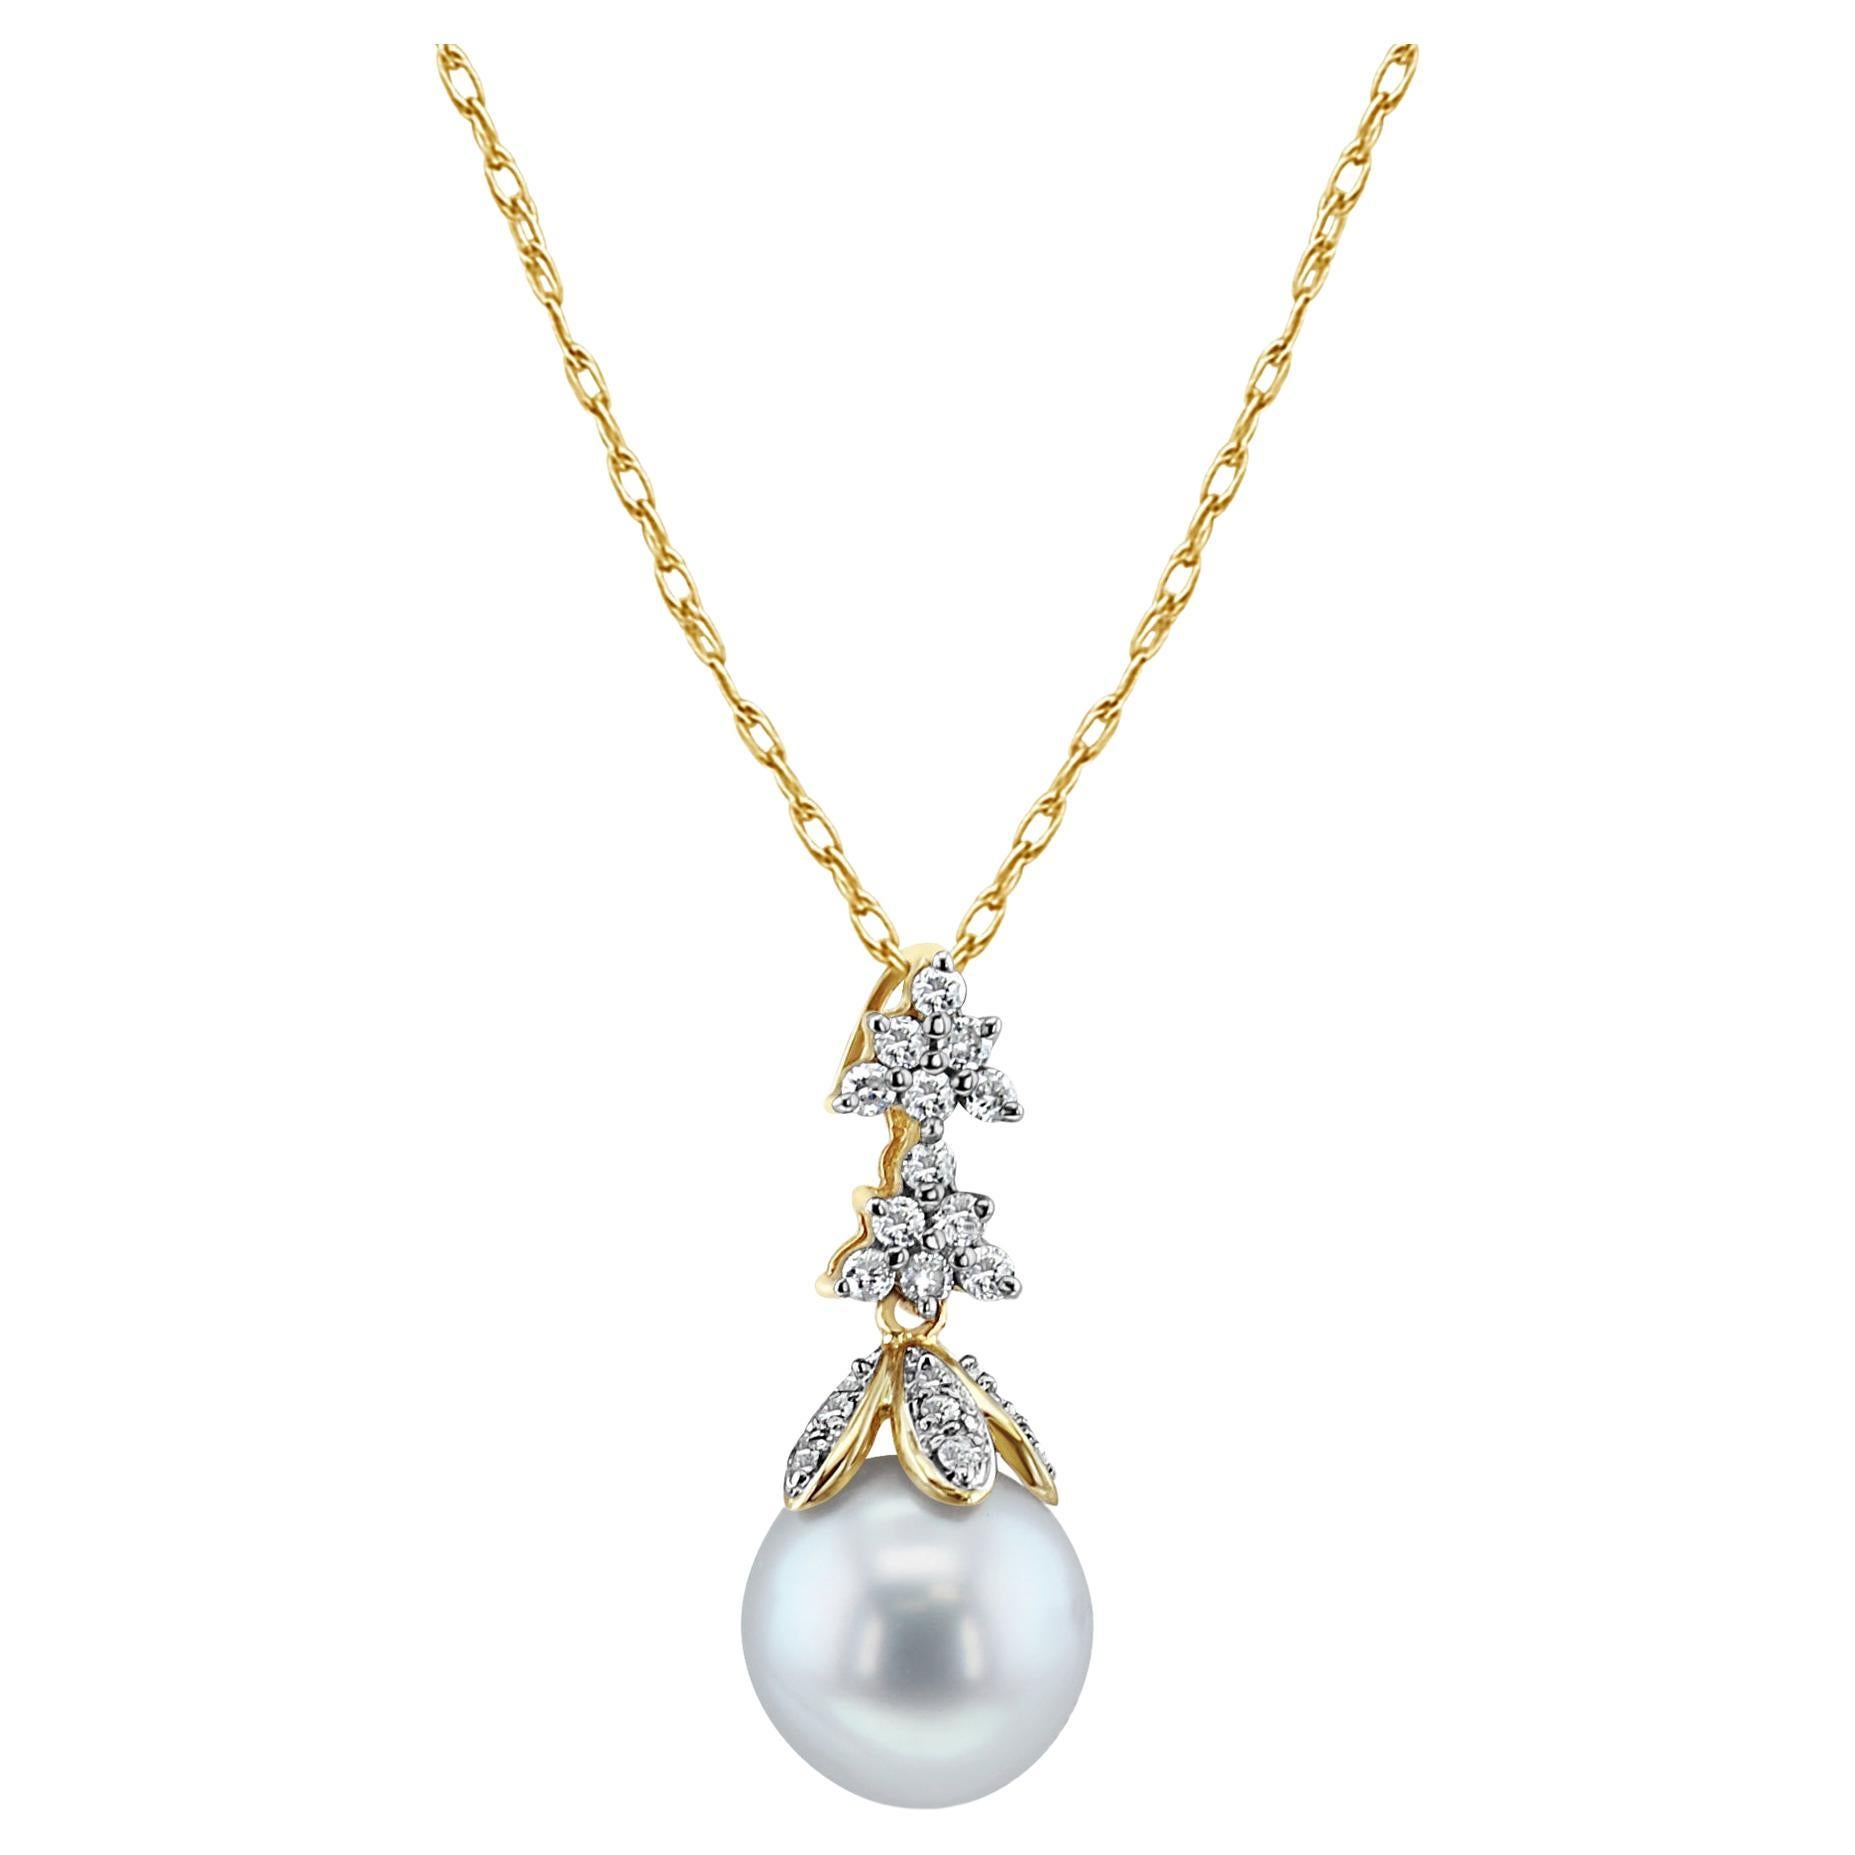 10mm Dangling Pearl Necklace with Diamond Accents .25cttw 14k Yellow Gold